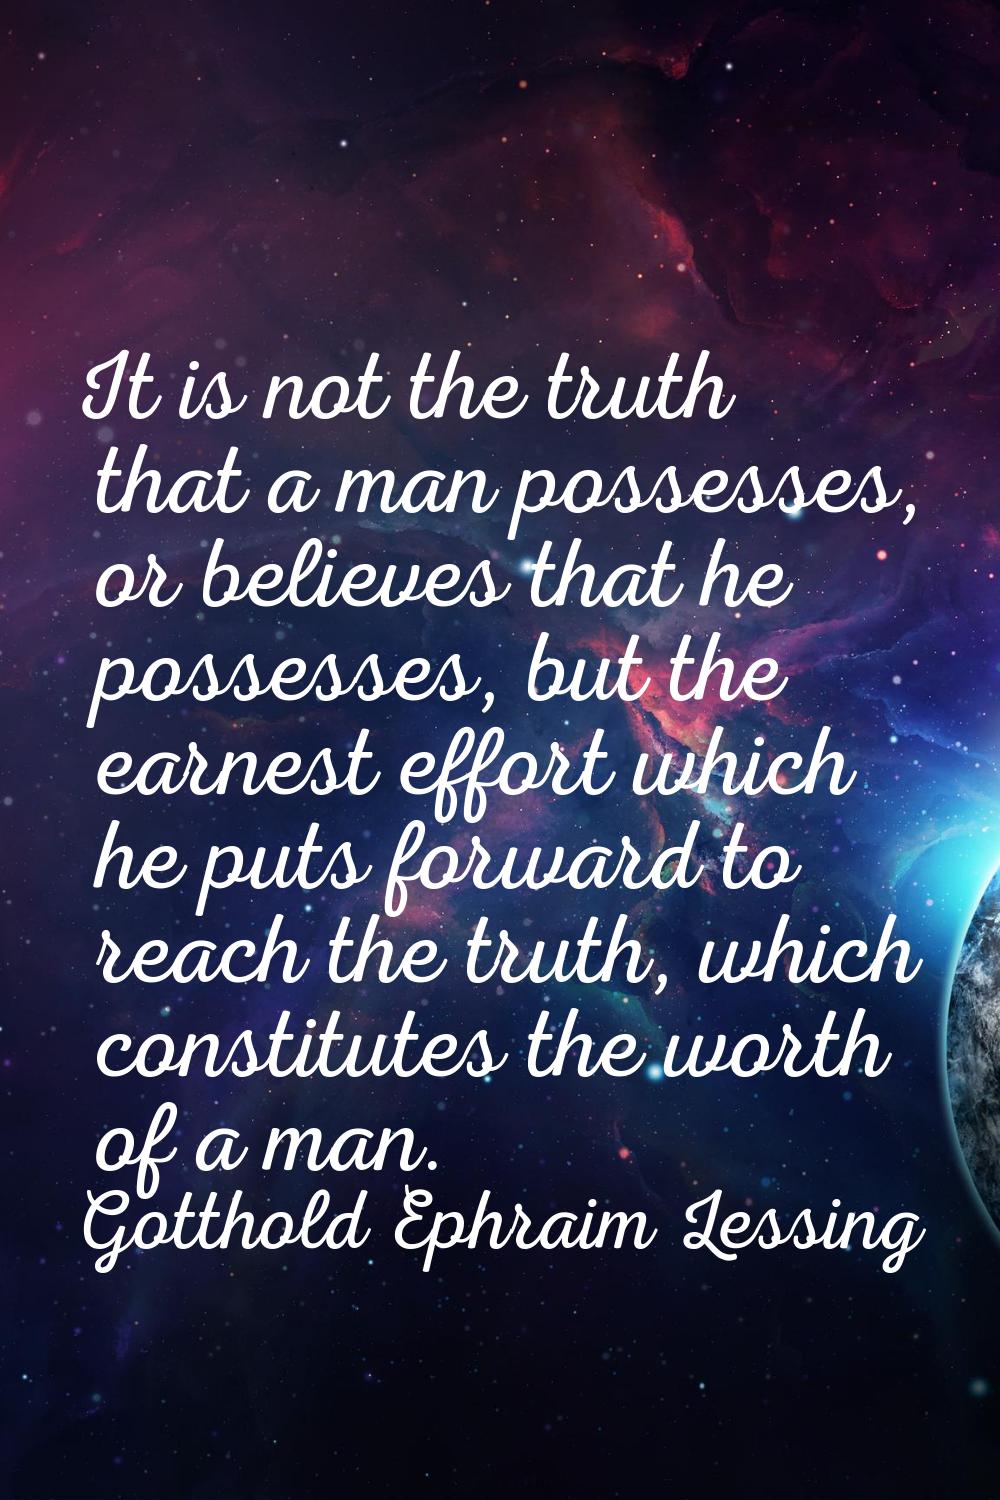 It is not the truth that a man possesses, or believes that he possesses, but the earnest effort whi